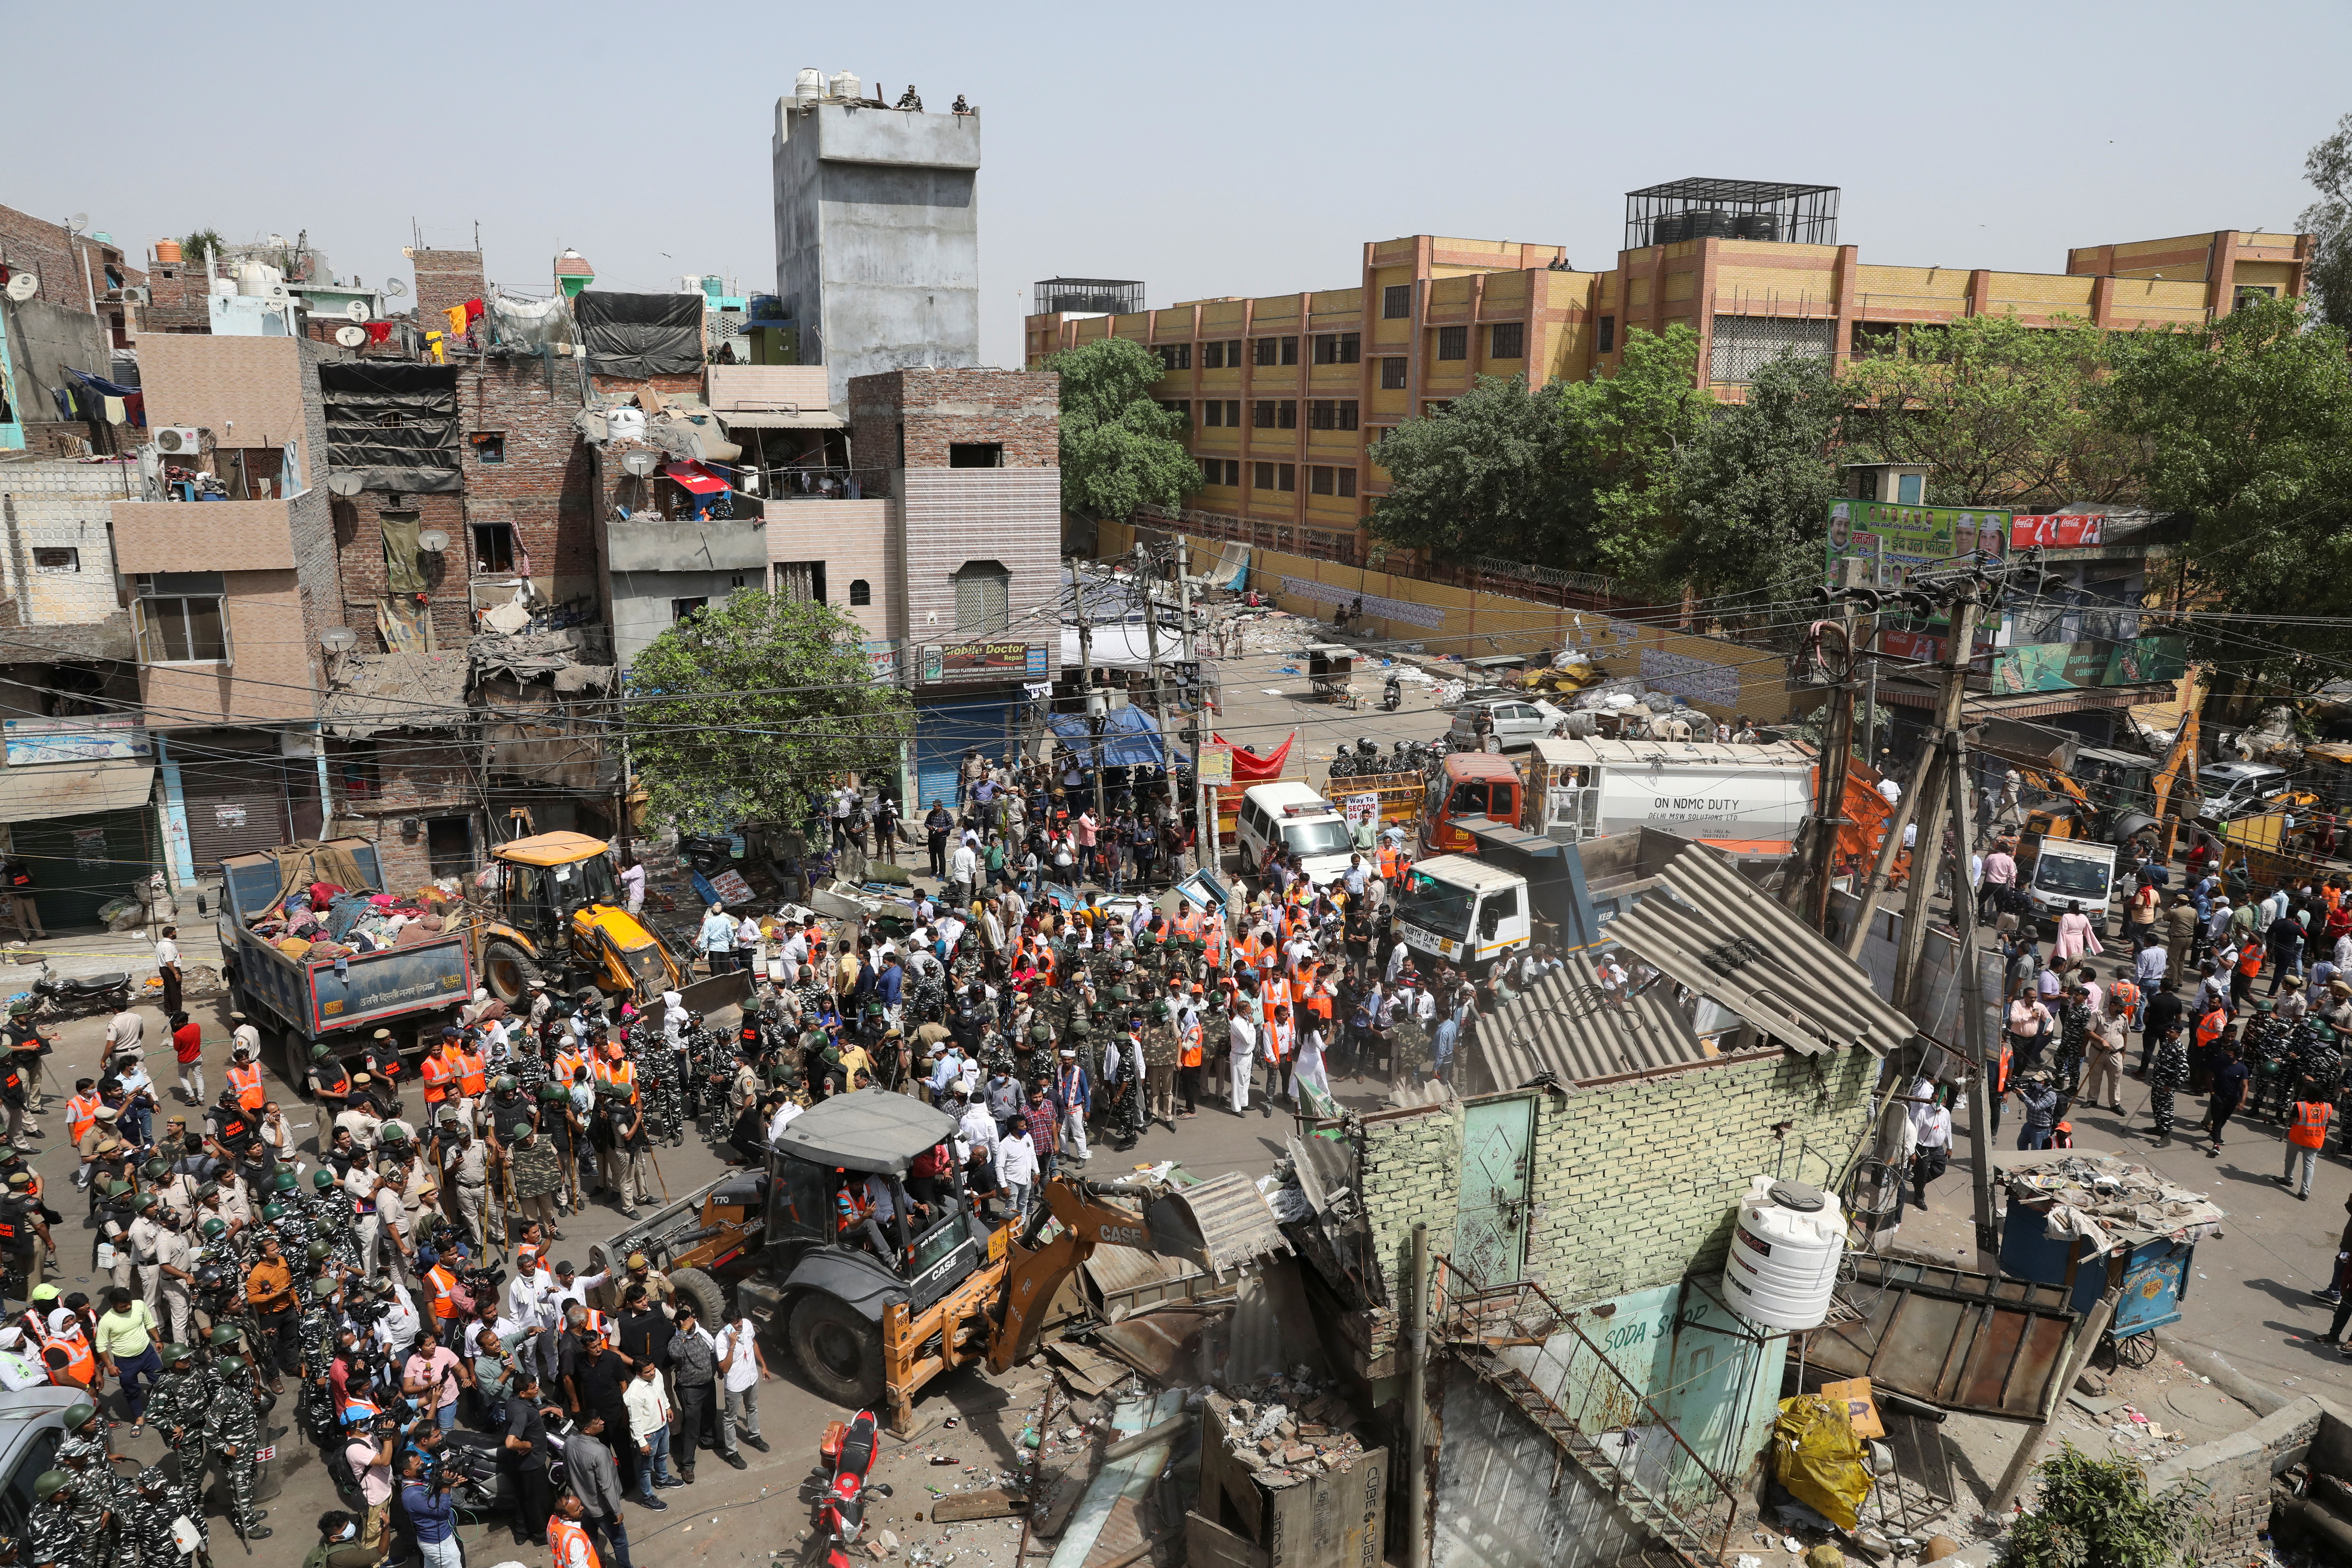 Police officials and members of security forces oversee the demolition of small illegal retail shops, in New Delhi